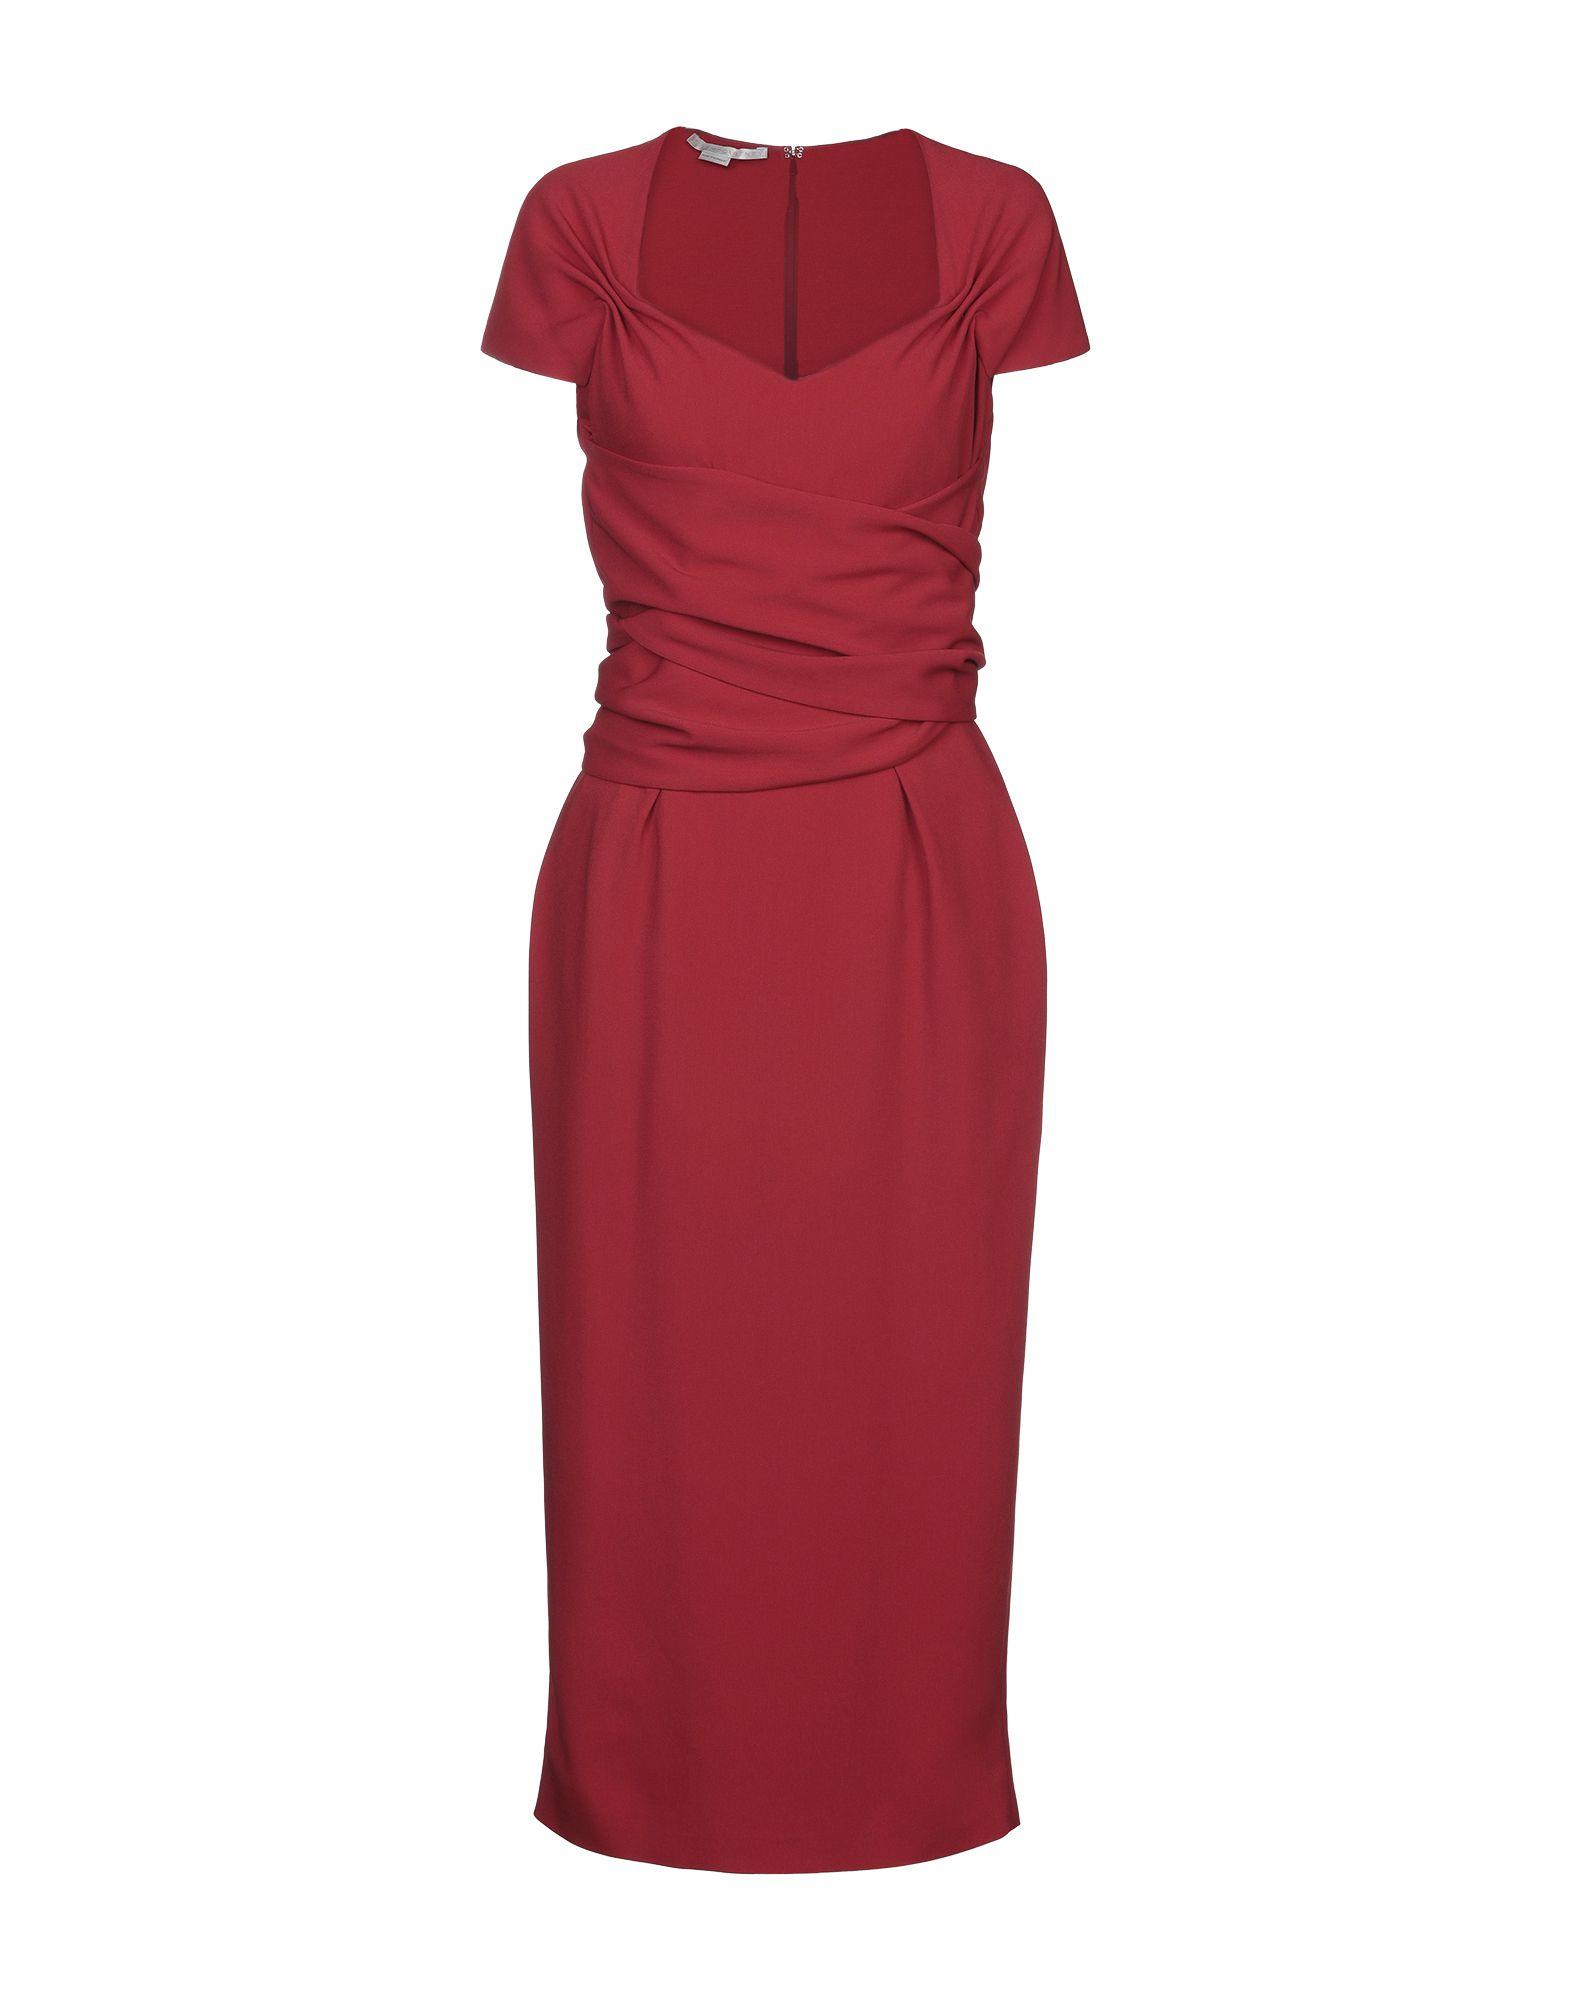 Stella McCartney Synthetic Knee-length Dress in Red - Lyst